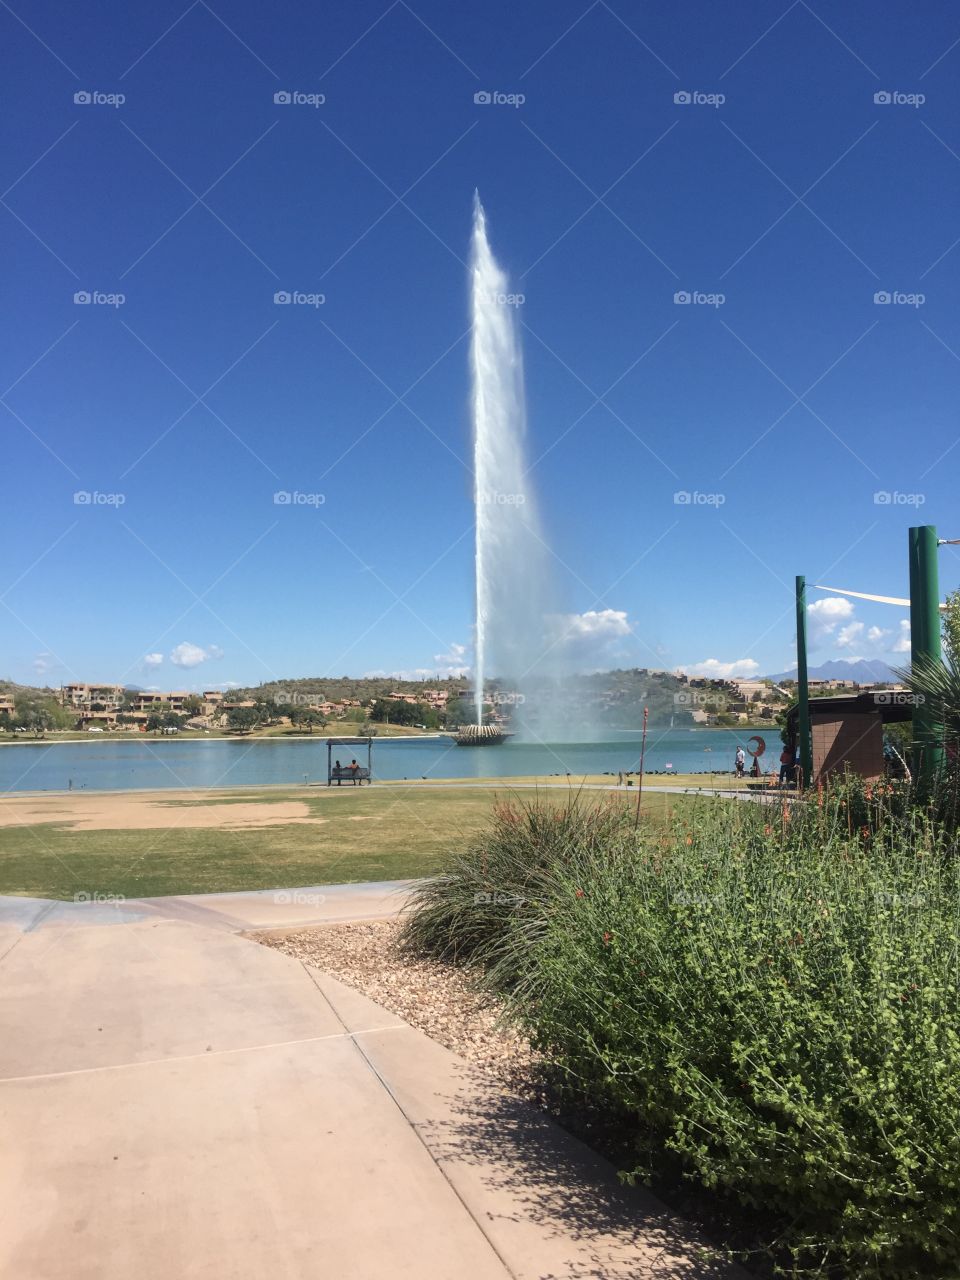 Fountain Hills Fountain. Huge water spout in the middle of a pond in Fountain Hills, AZ